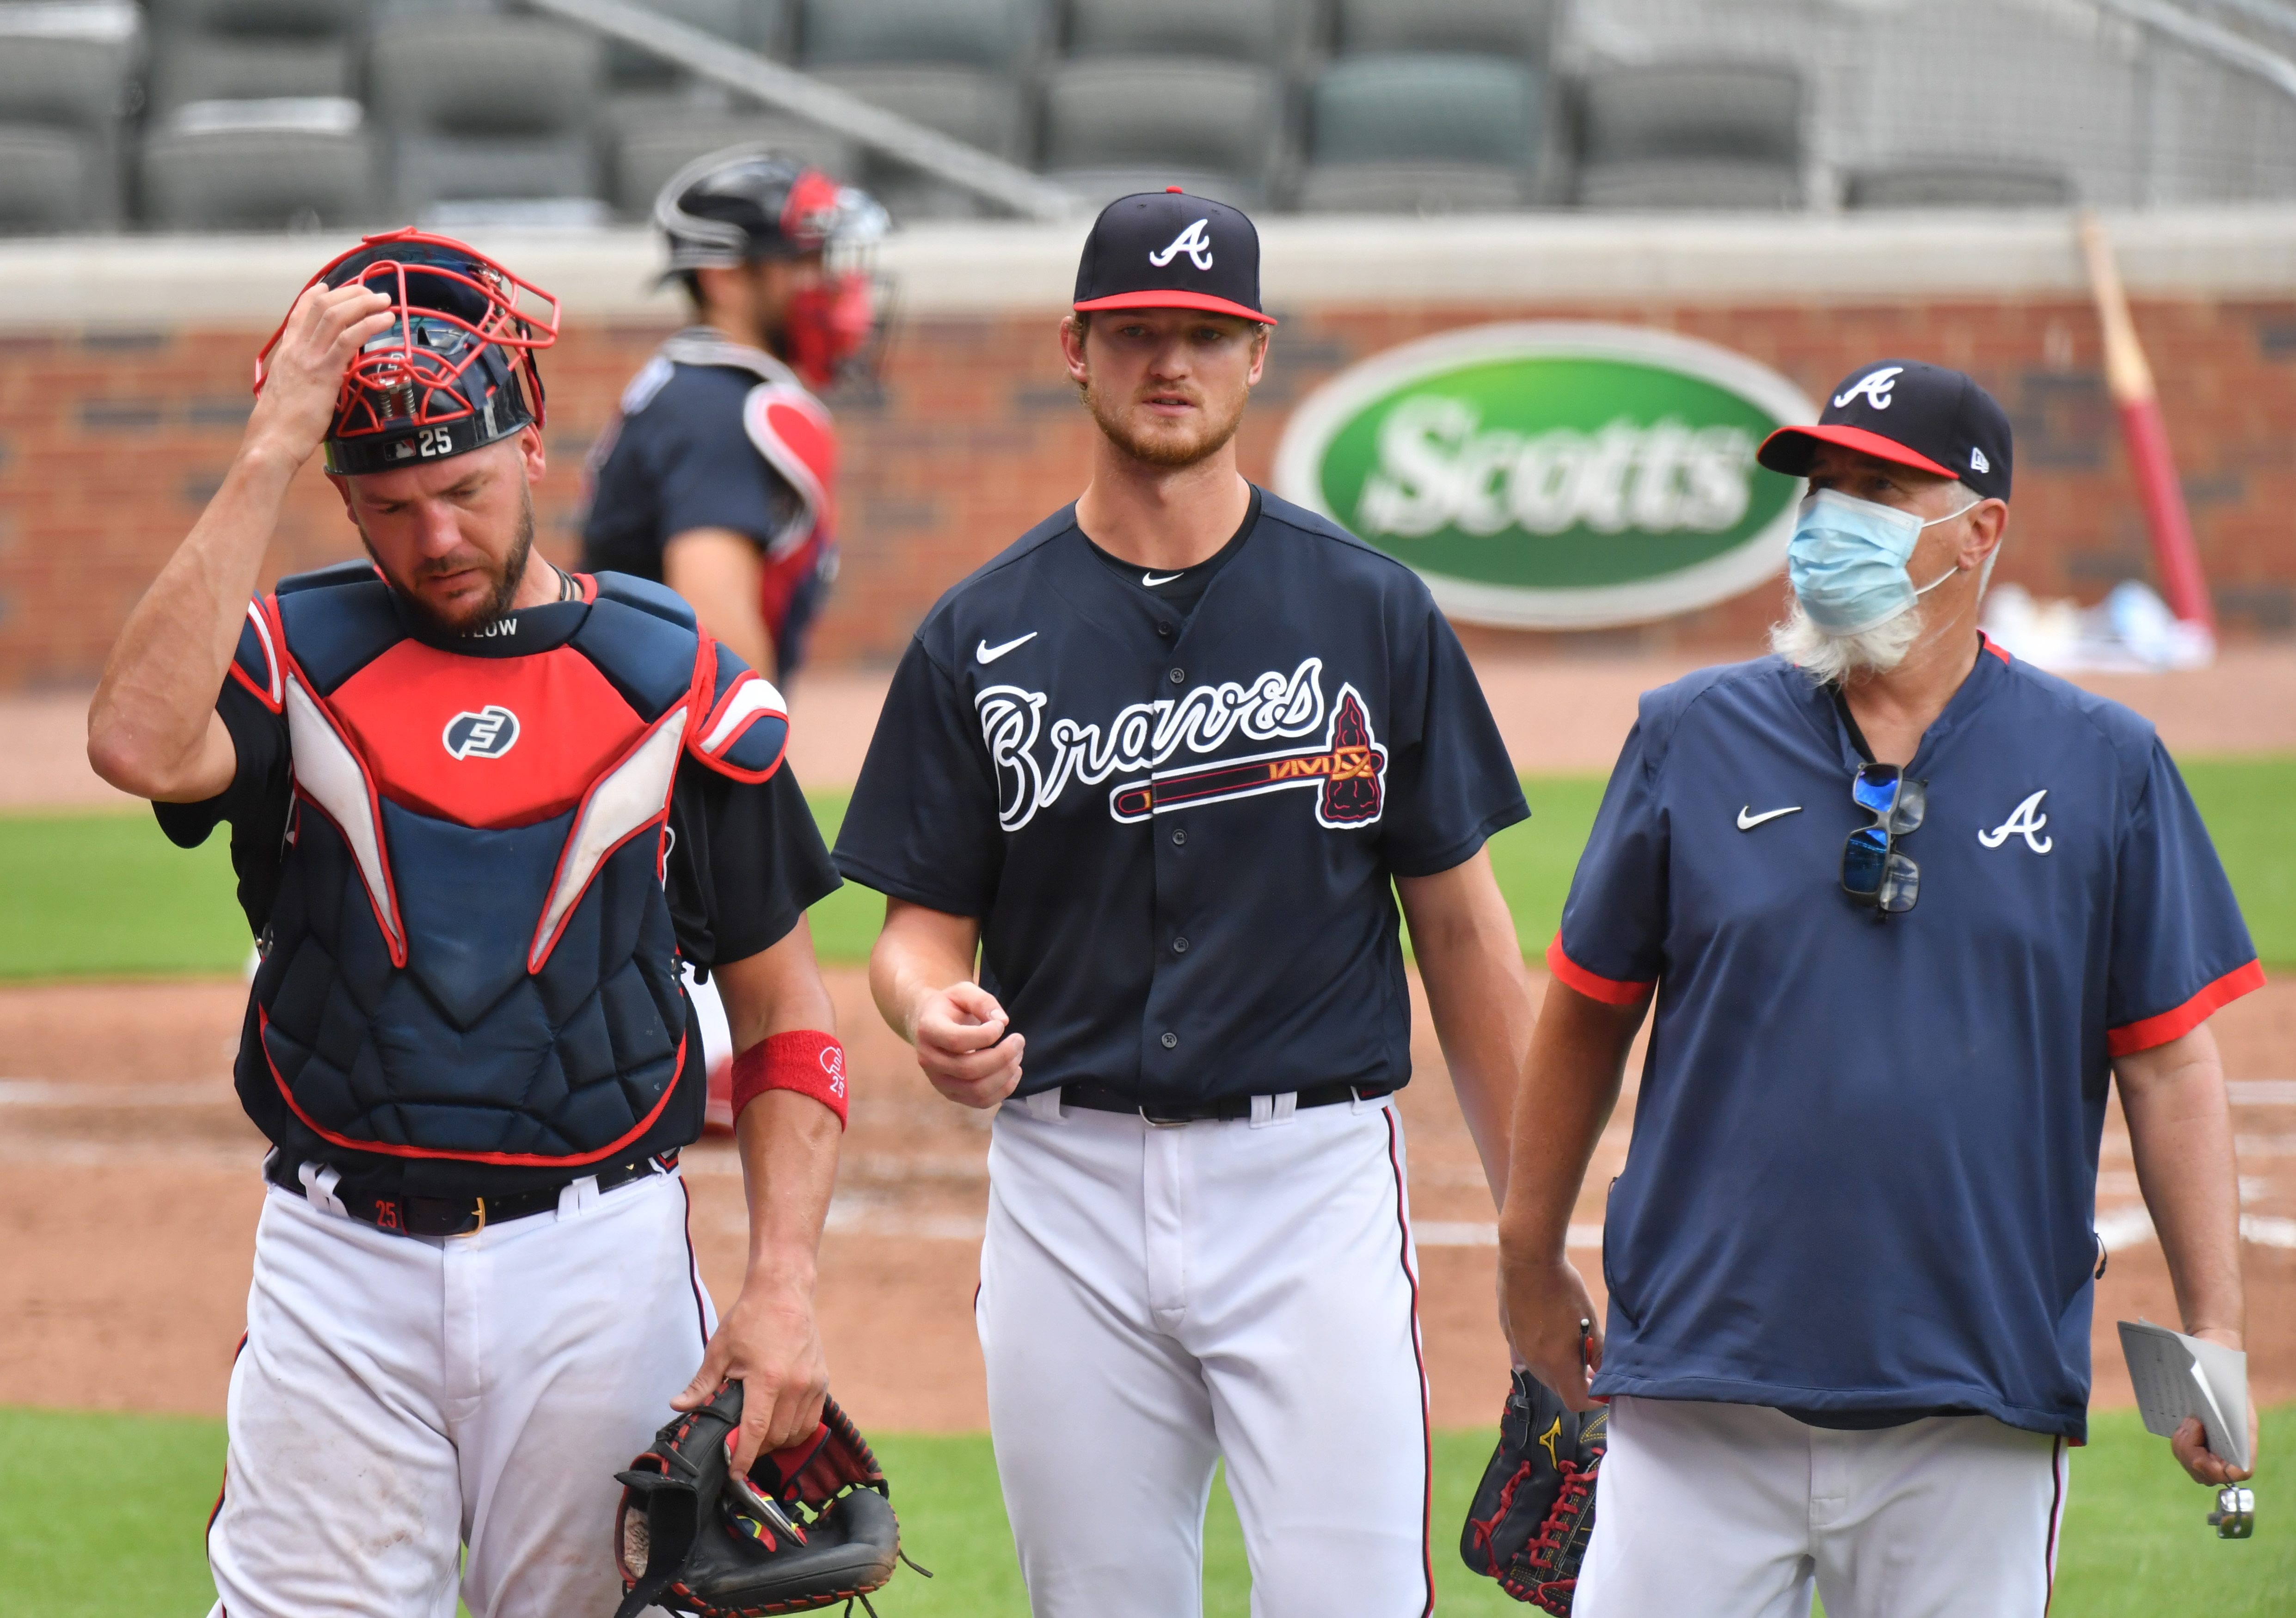 Braves intrasquad game will be televised